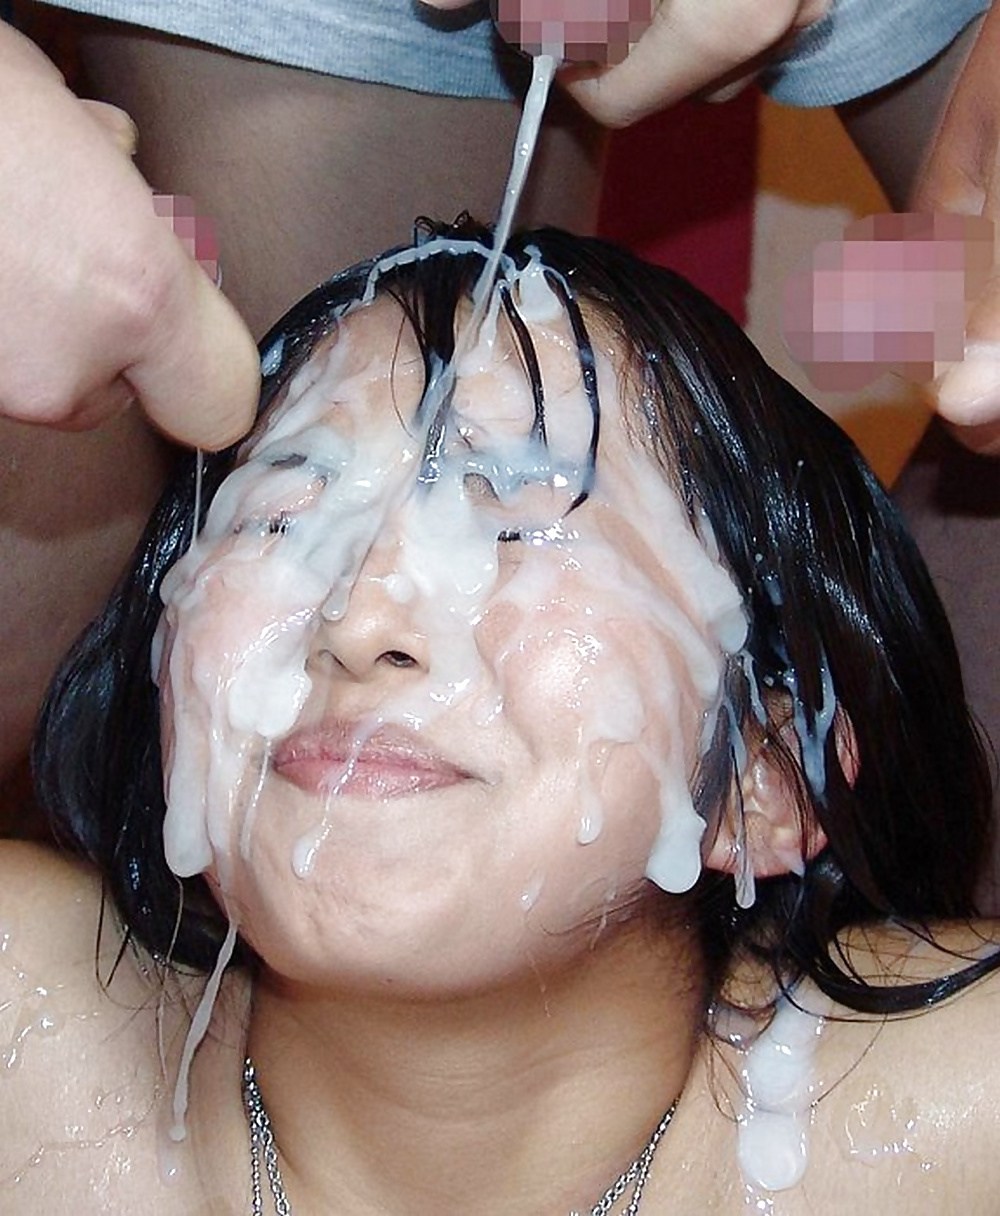 Asian Covered In Cum - Asian Girl Covered in Sperm (66 photos) - porn photo